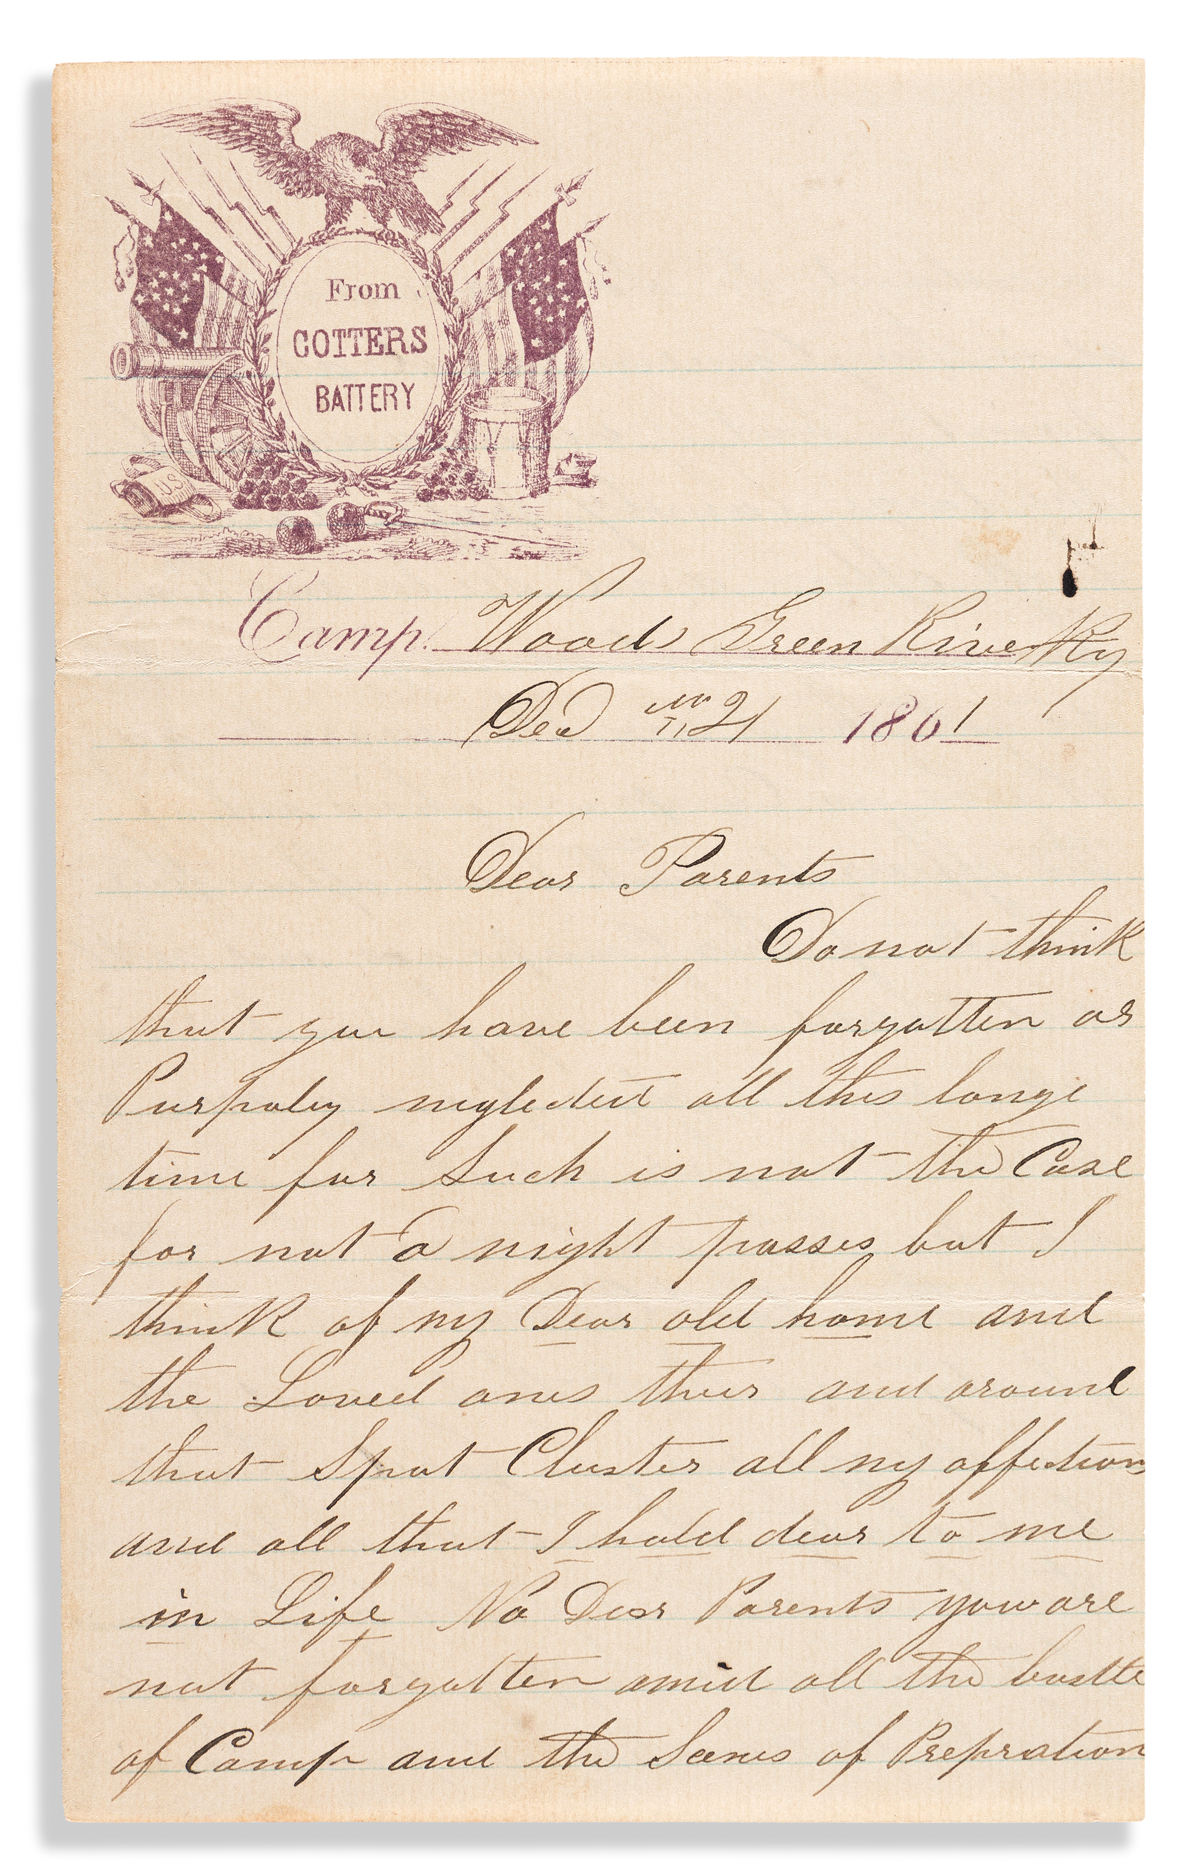 (CIVIL WAR--OHIO.) Charles Cotter. Description of the Battle of Rowletts Station by the captain of Cotters Battery.